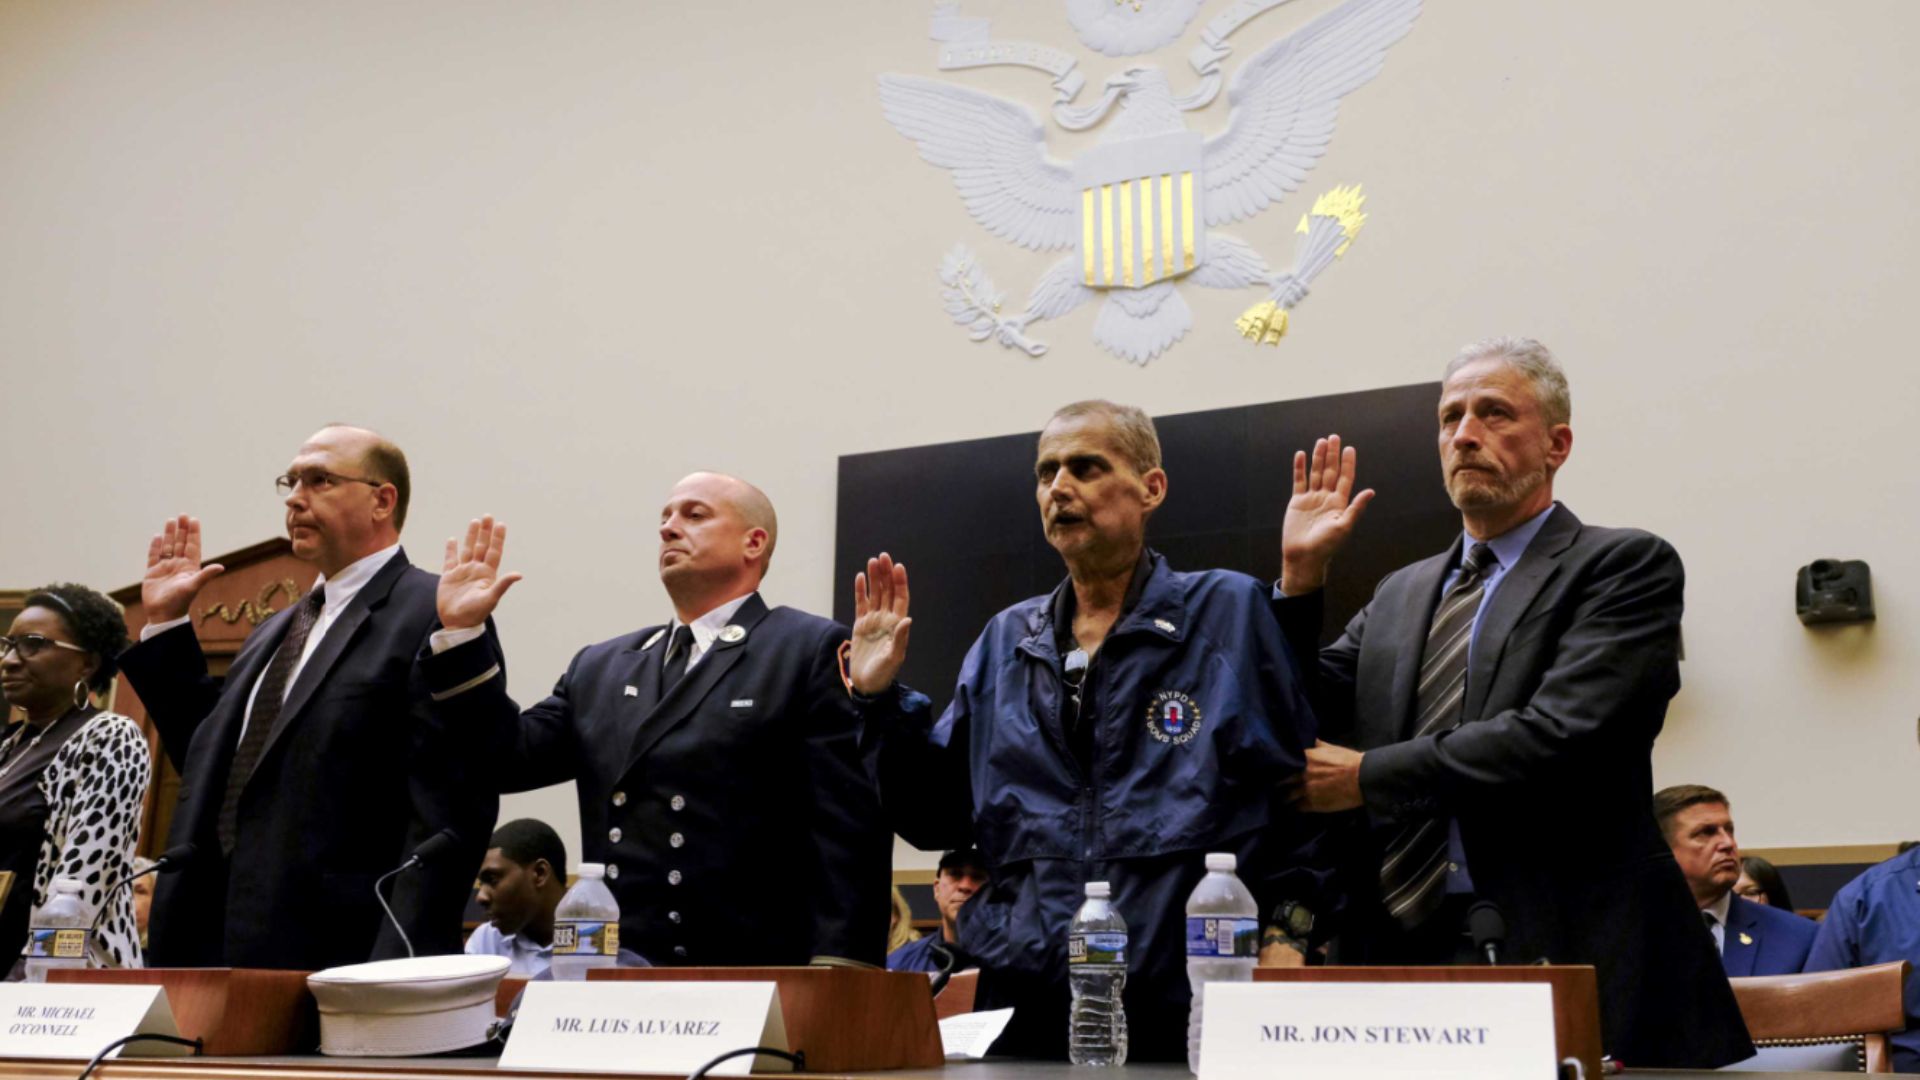 Four people raise their left hands while being sworn in before testifying. The wall behind them is cream-colored.